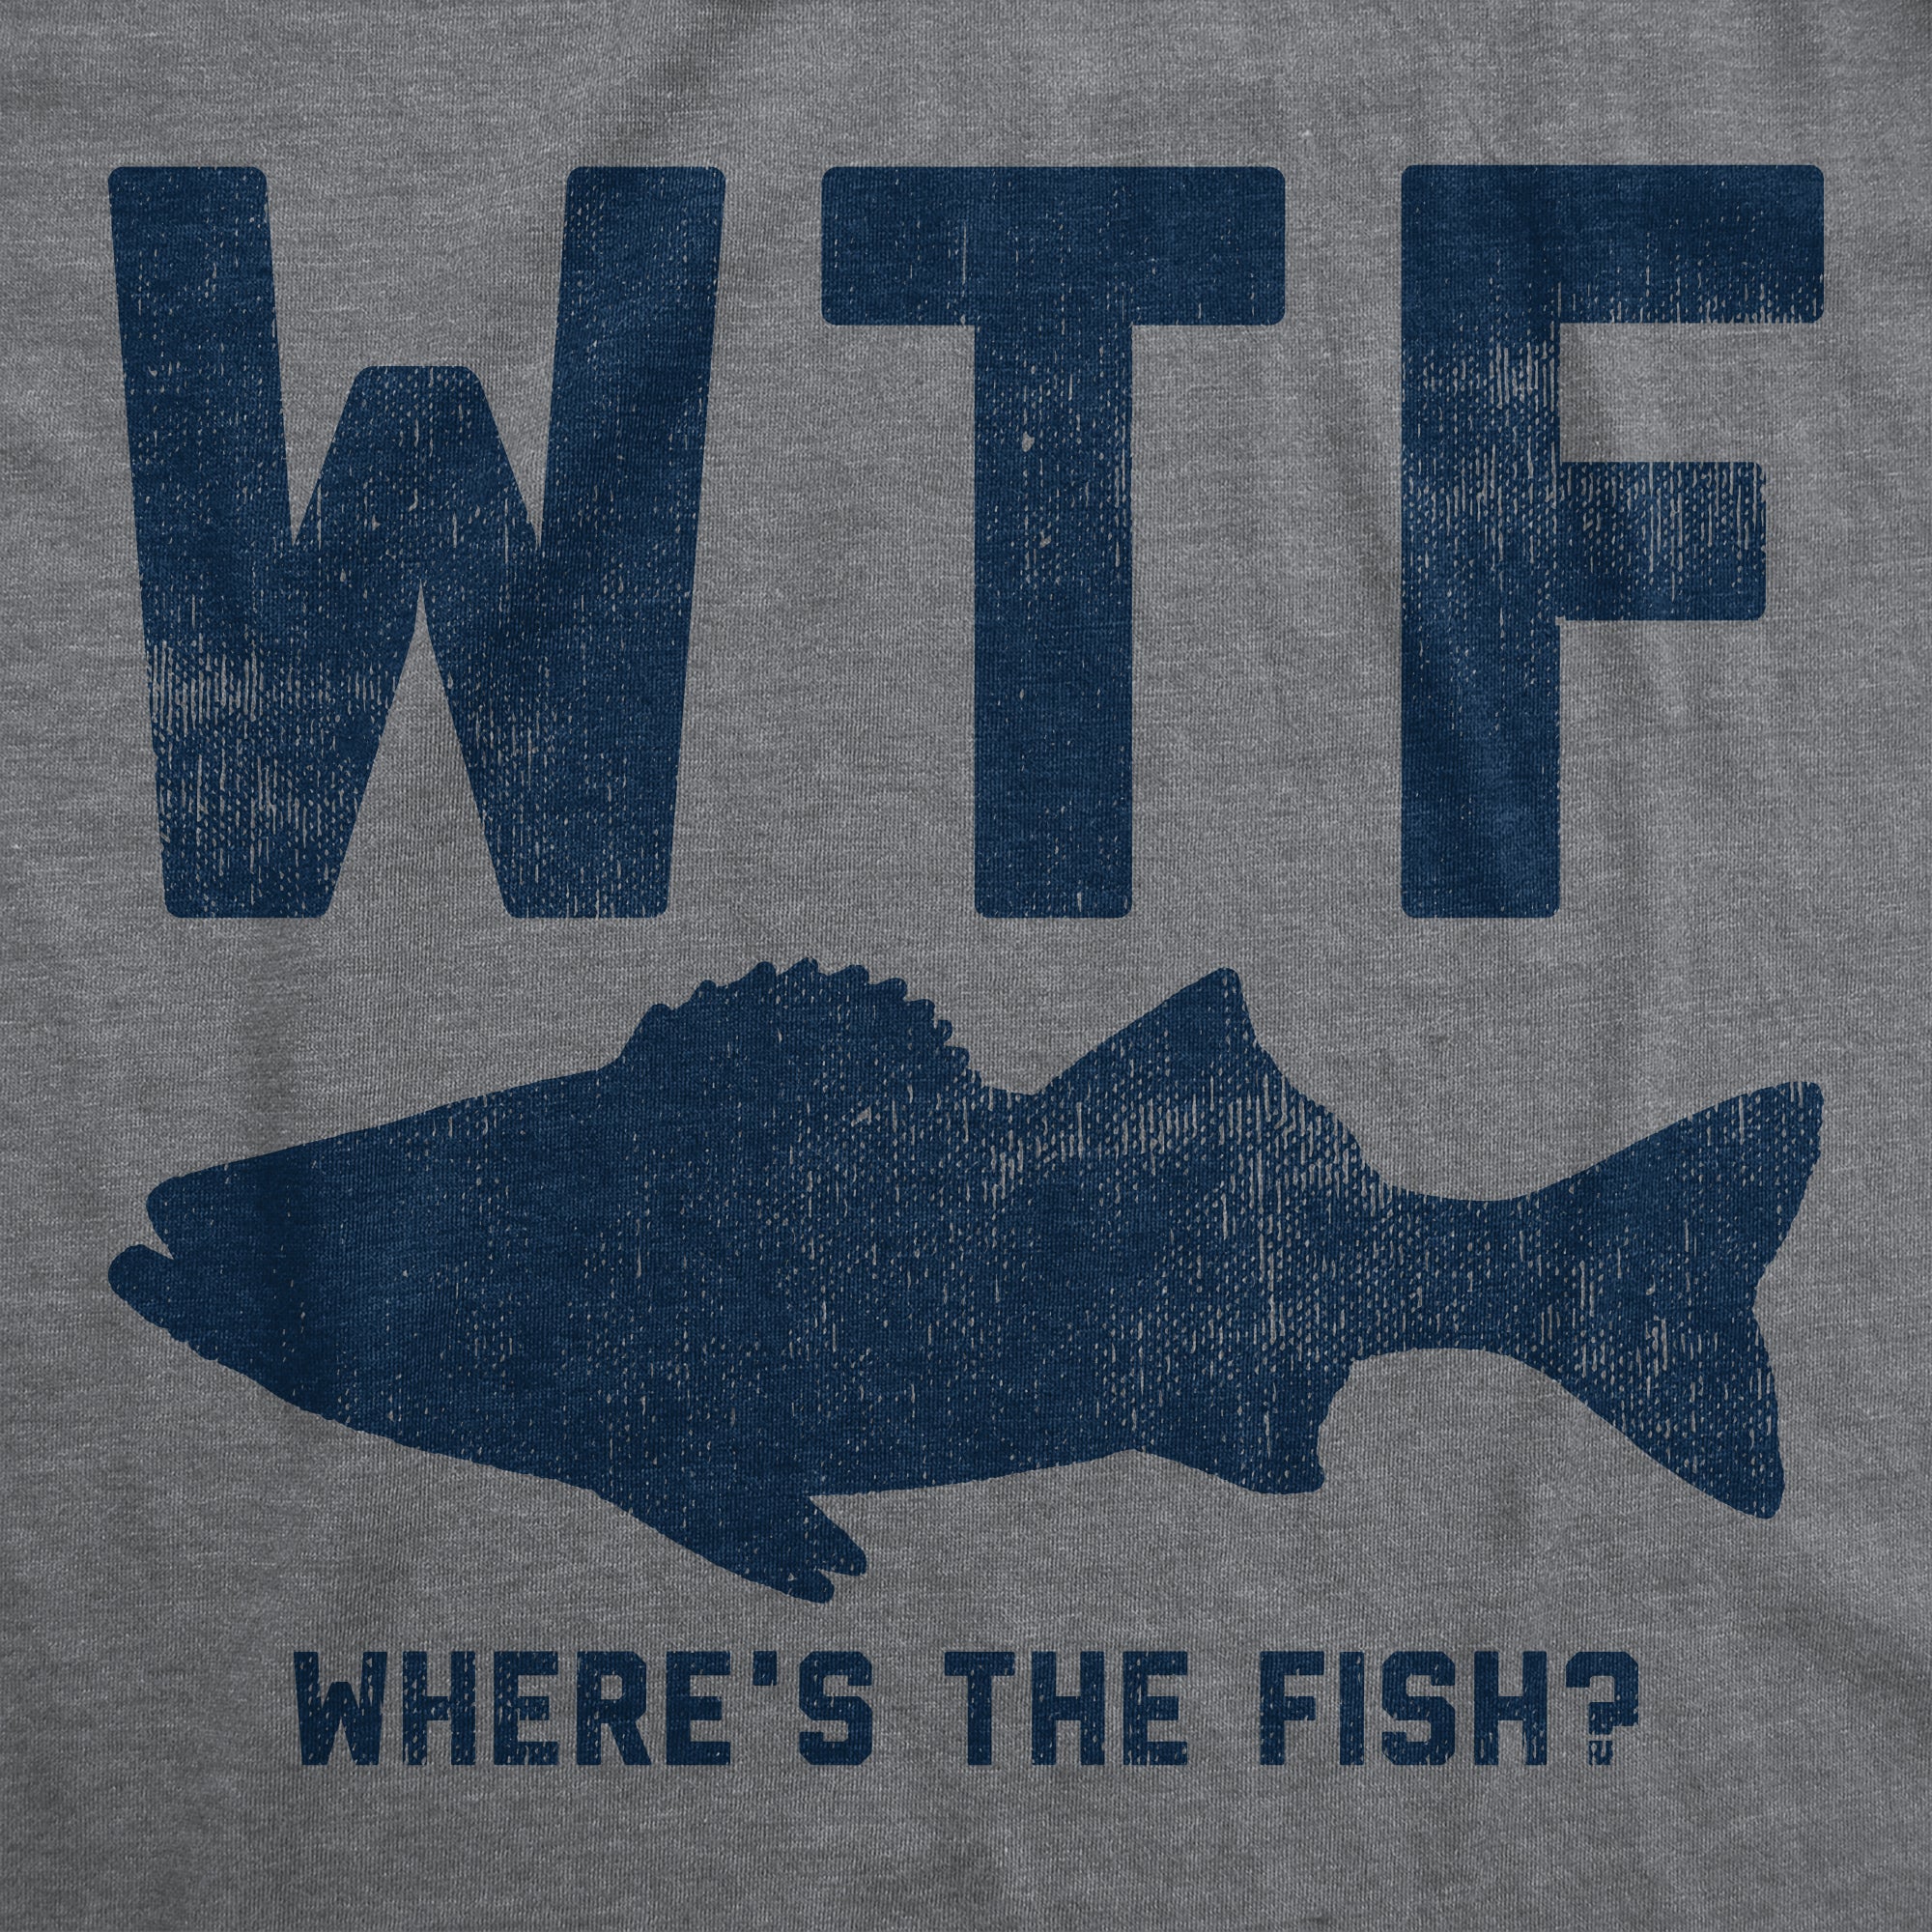 Wife Won't Follow Me There Fishing Shirt Funny Fishing Shirt Men's T-shirt  Fishing Tee Shirt Fishing Tees Six Colors 